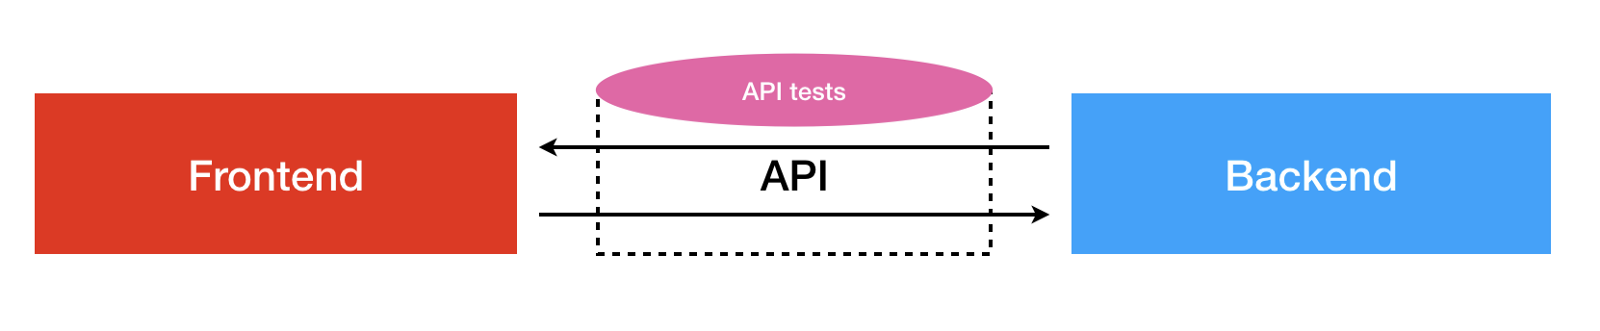 API testing is a must-have for any API-based app.